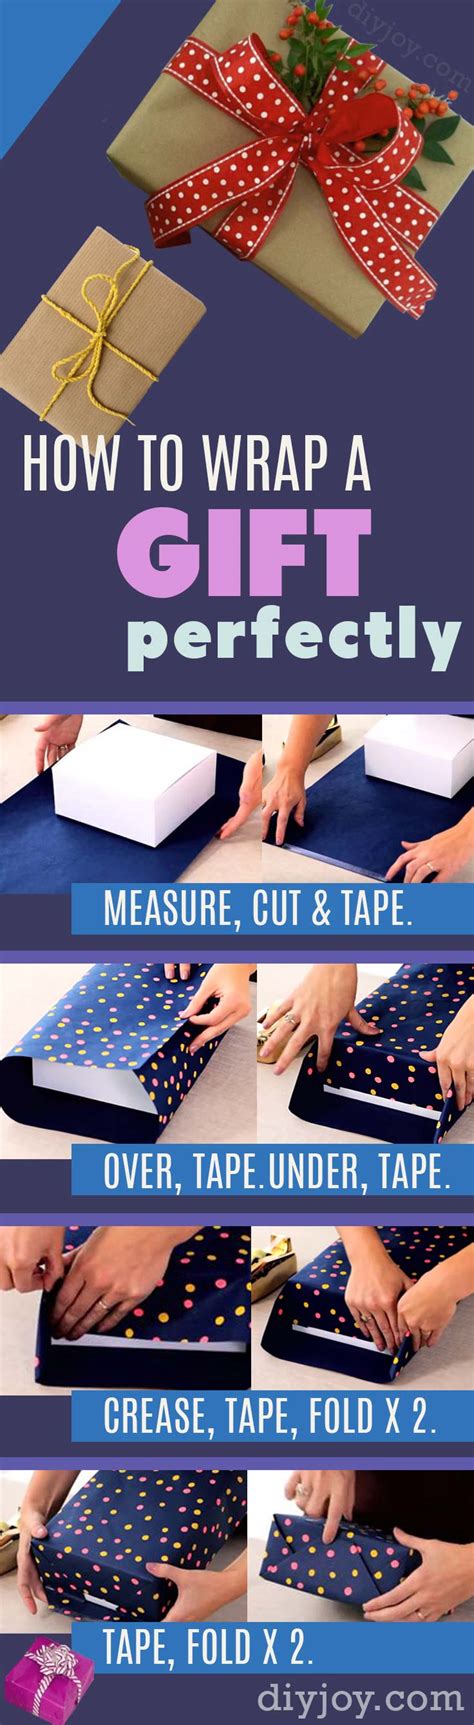 52 Insanely Clever T Wrapping Ideas Youll Love Diy Opic 2021